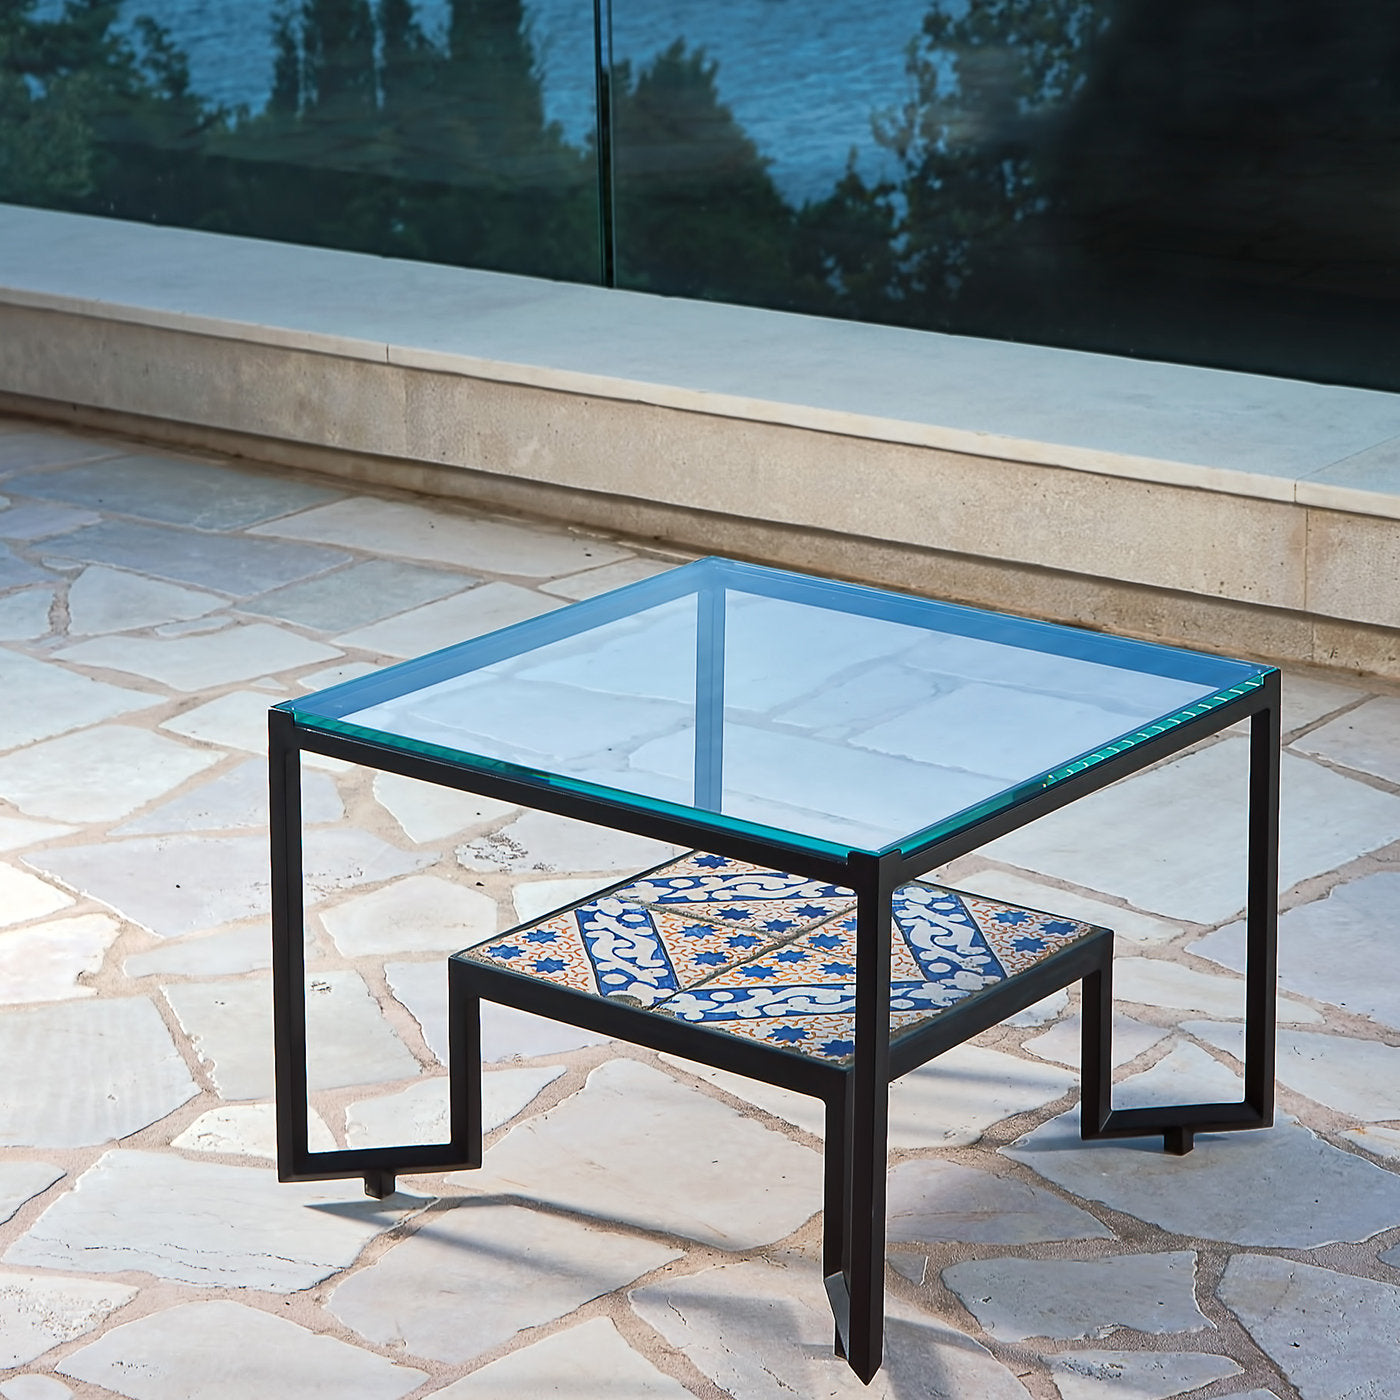 Glass and Tiles Spider Table - Alternative view 1